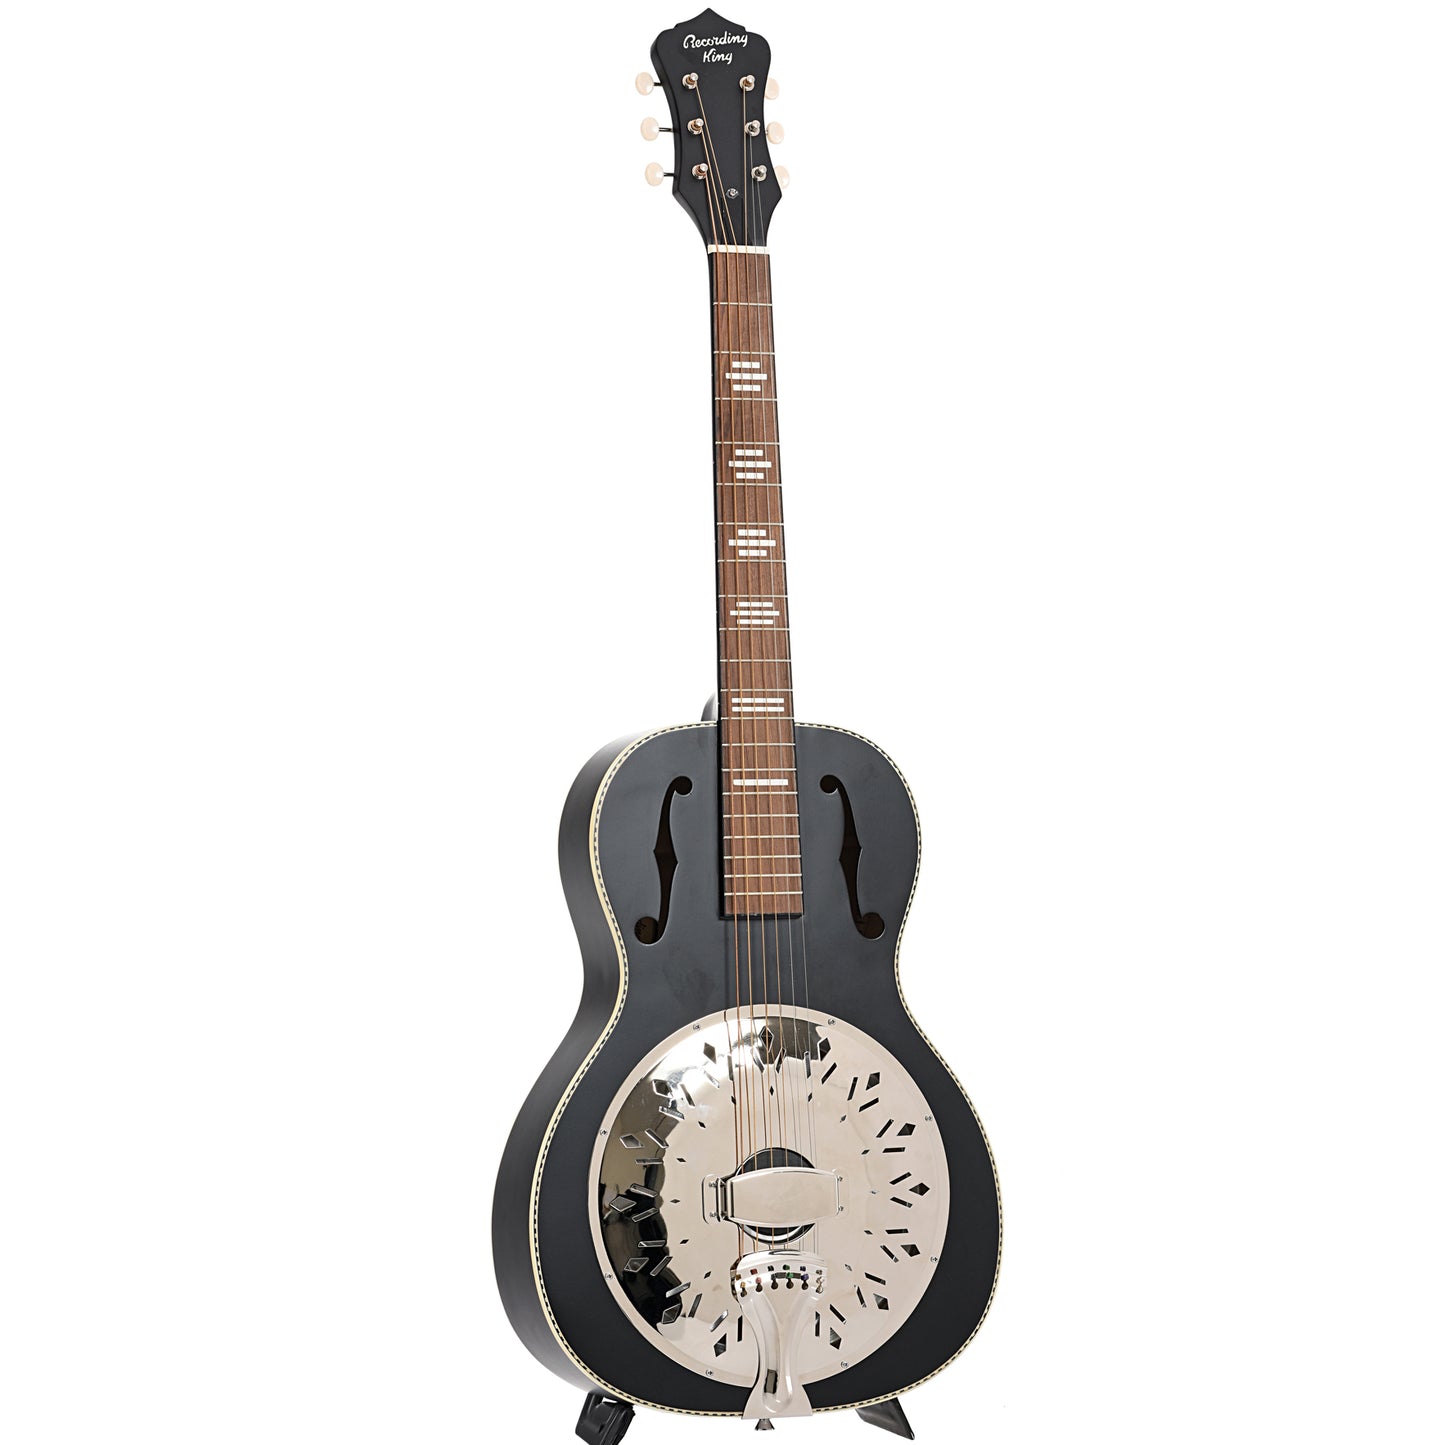 Full front and side of Recording King Dirty 30's Single 0 Resonator Guitar, Black Finish